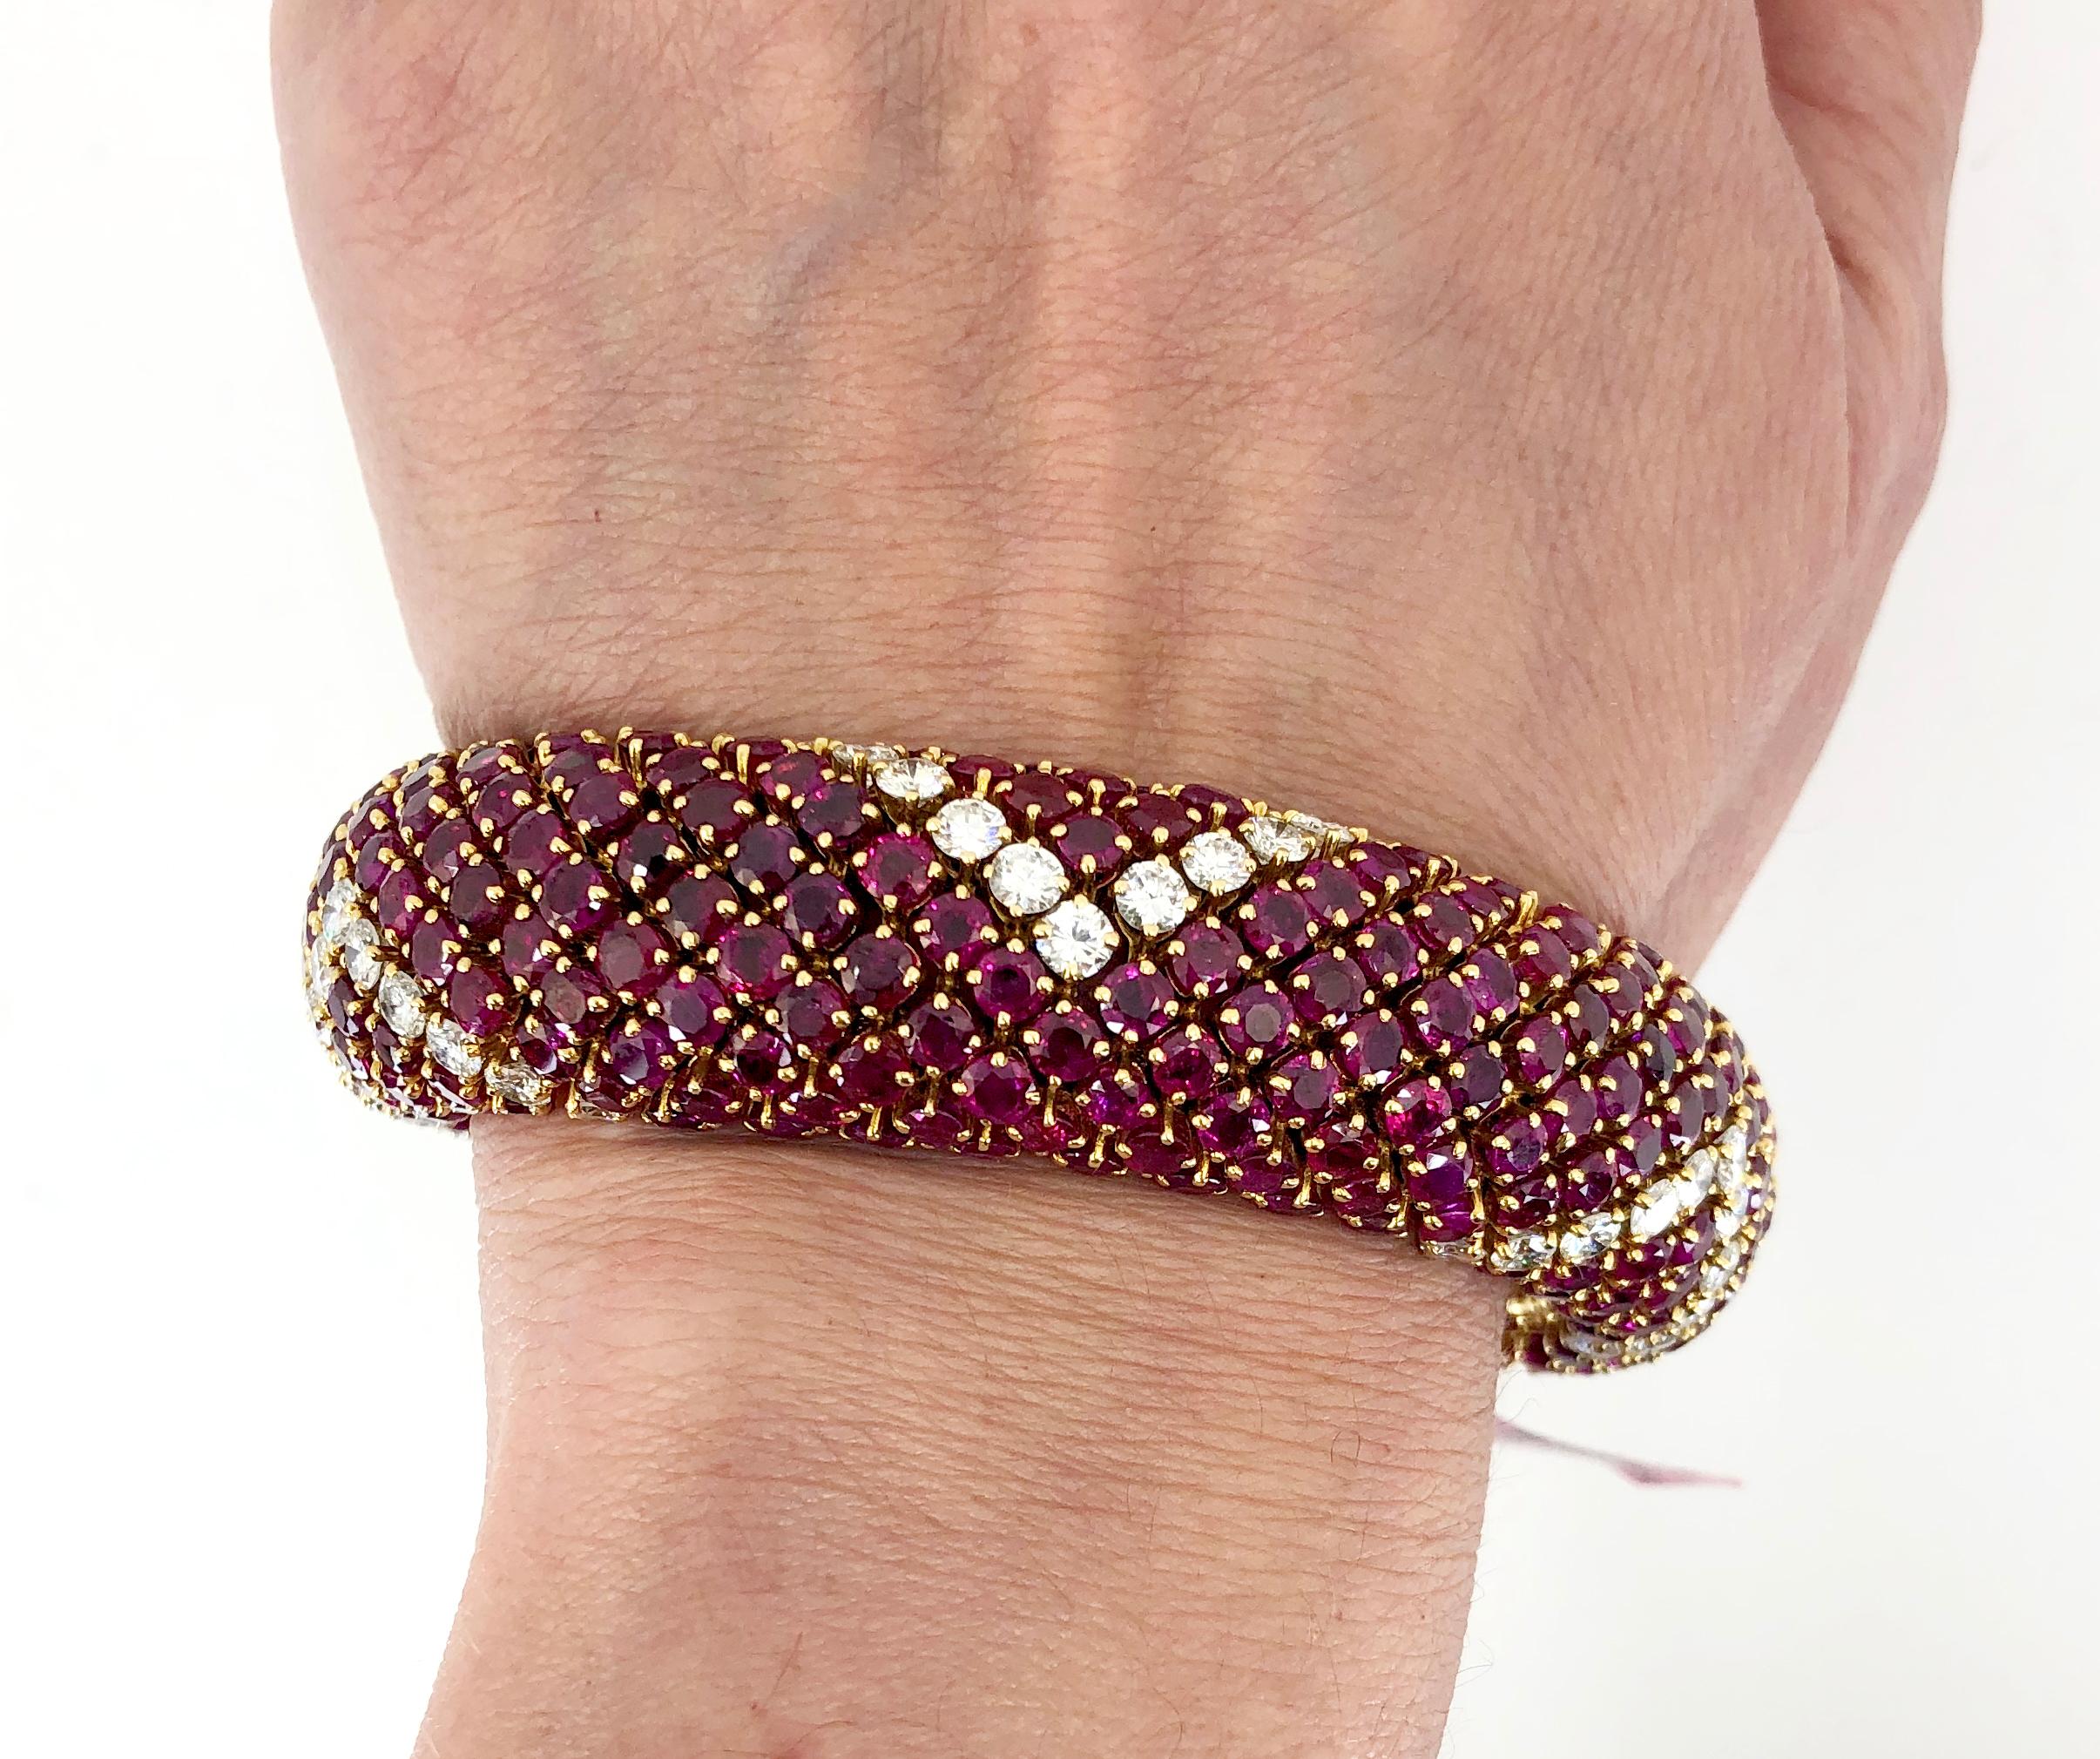 Retro-Style Ruby Diamond Bombe Bracelet in 18k Yellow Gold.

This bejeweled retro-style bracelet is compiled by round brilliant rubies configured in a continuous bombé shape; all mounted in yellow gold. An angular geometric motif is intermittently